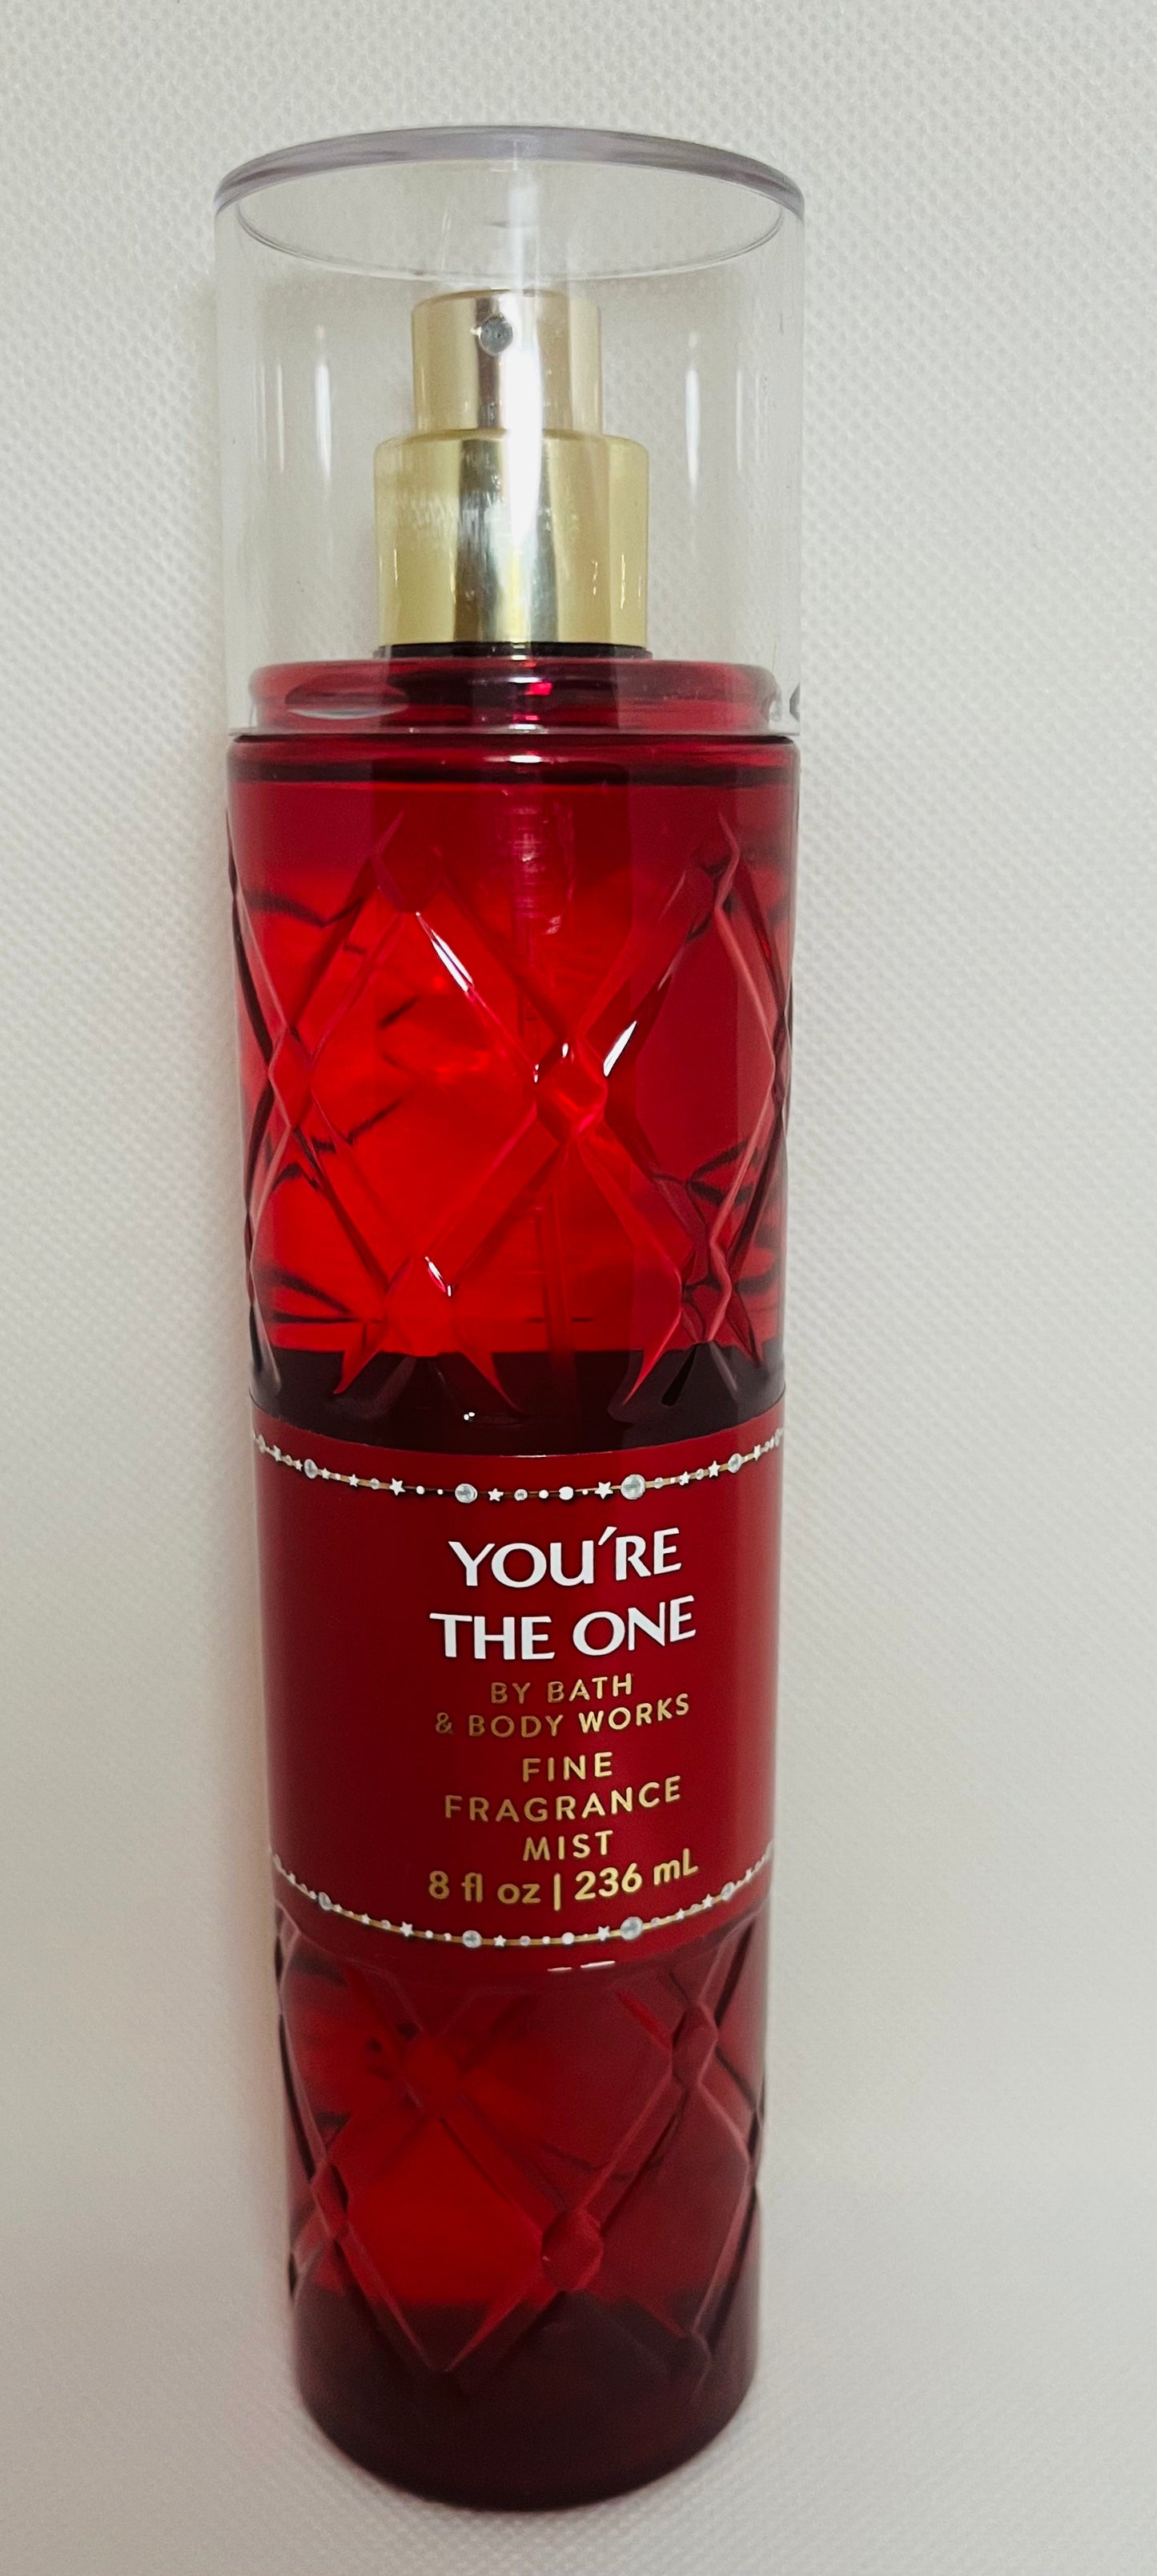 Bath and Body Works You’re The One Fine Fragrance Mist